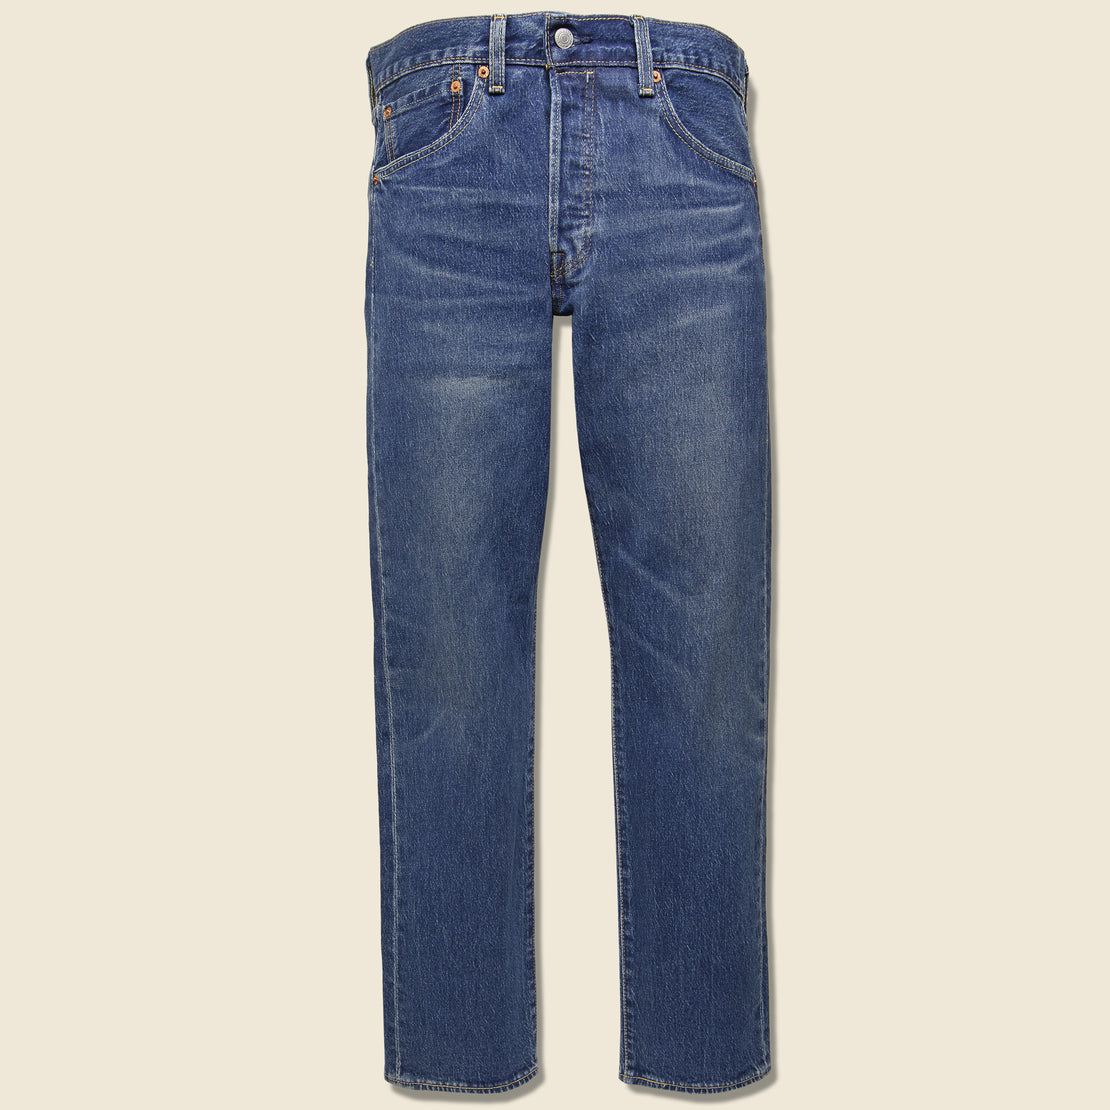 baby 501 jeans